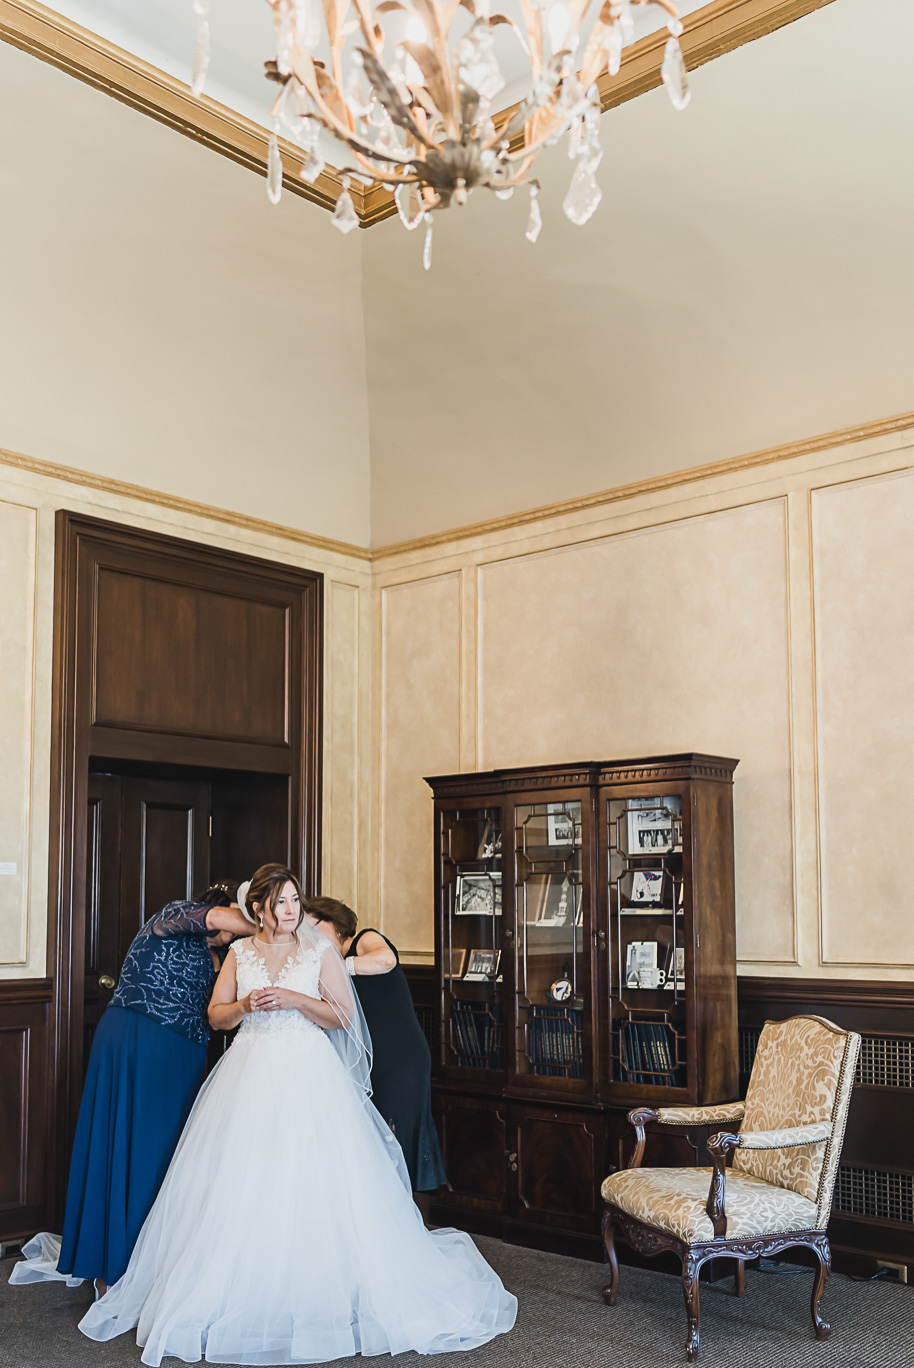 A fall Grosse Pointe Yacht Club wedding in Grosse Pointe, Michigan provided by Kari Dawson, top-rated Metro Detroit wedding photographer, and her team.